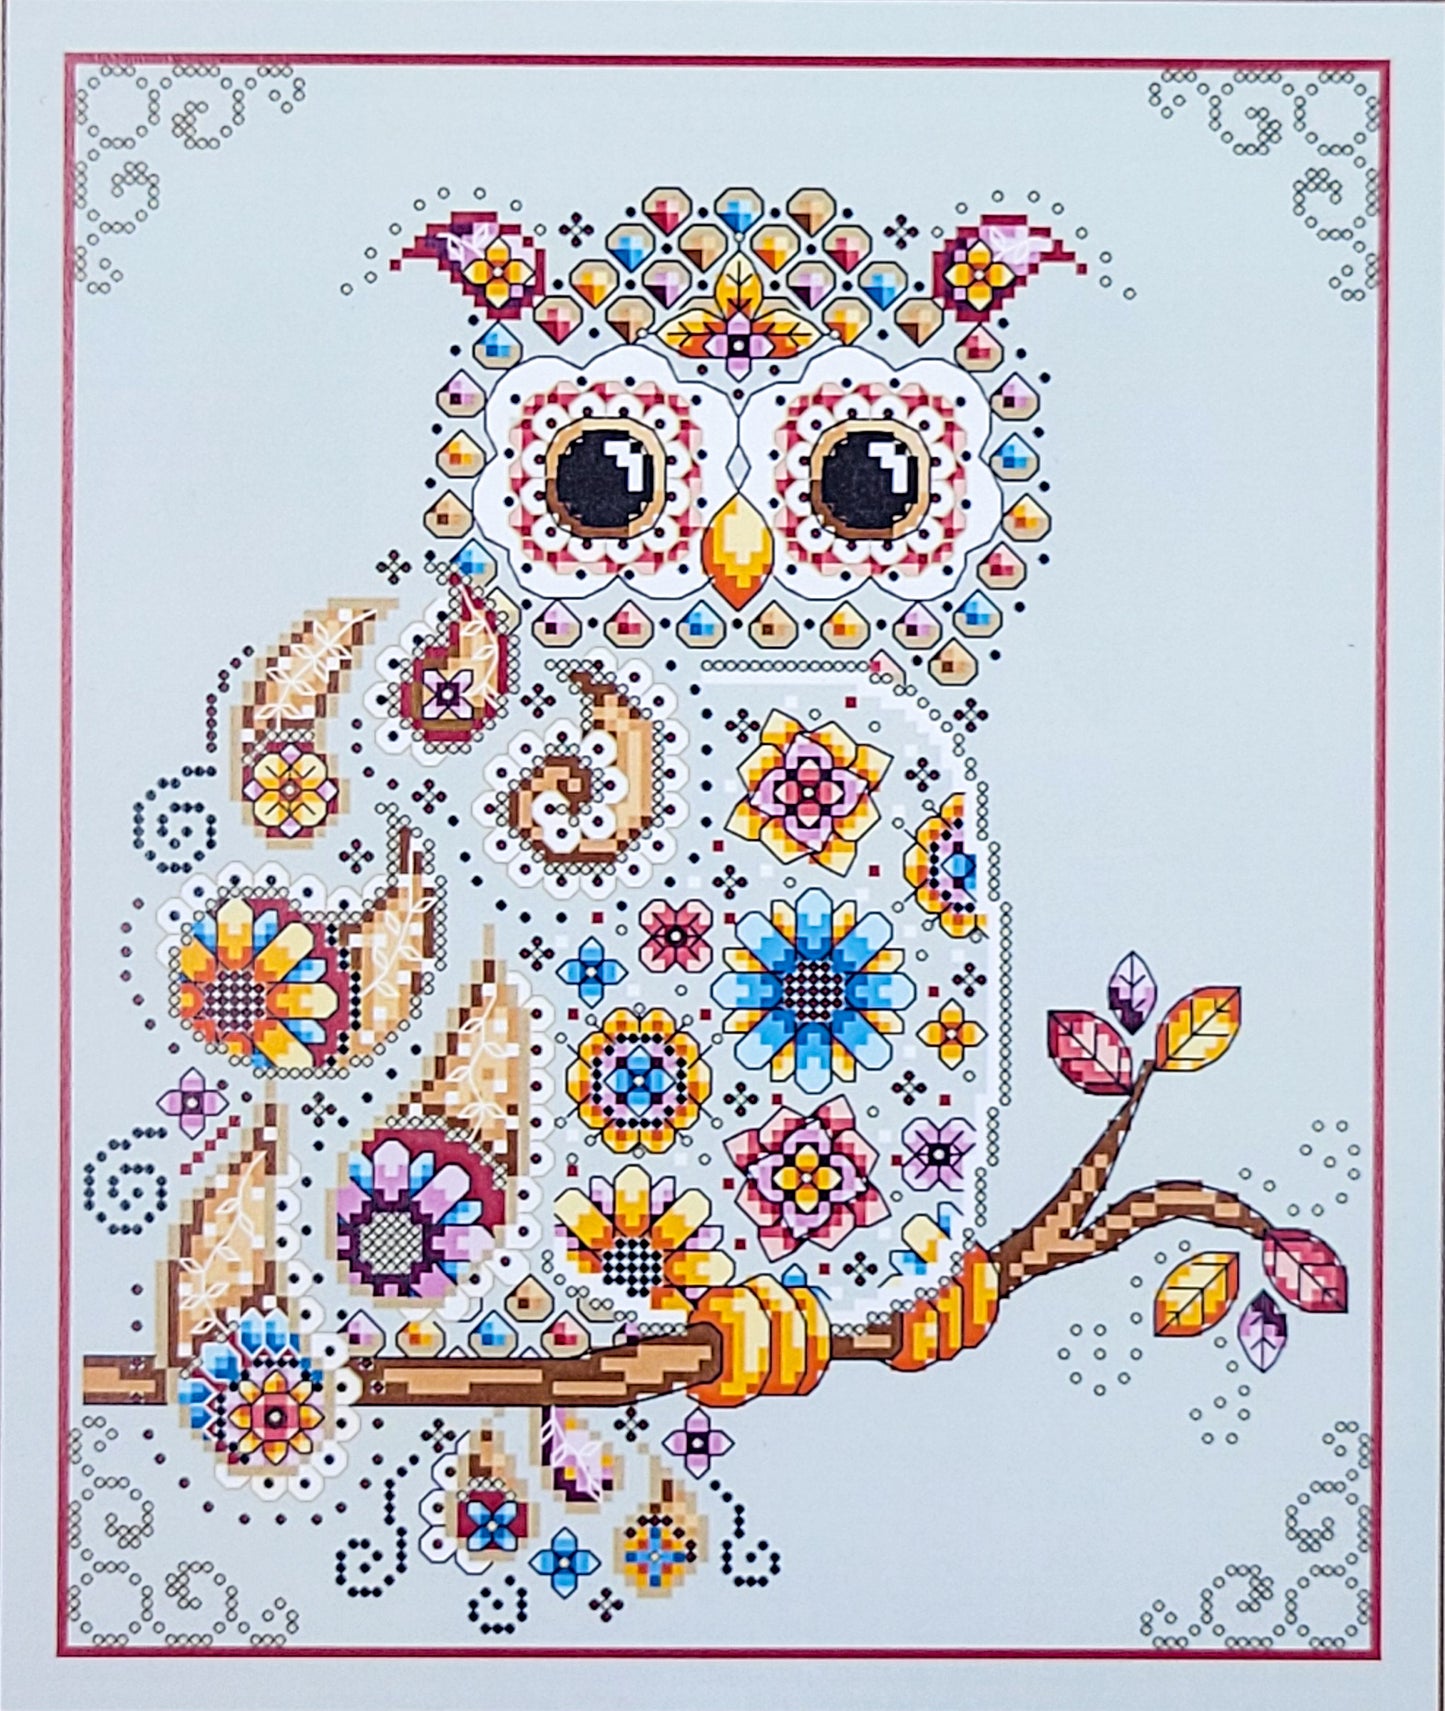 Paisley Owl by Shannon Christine Designs